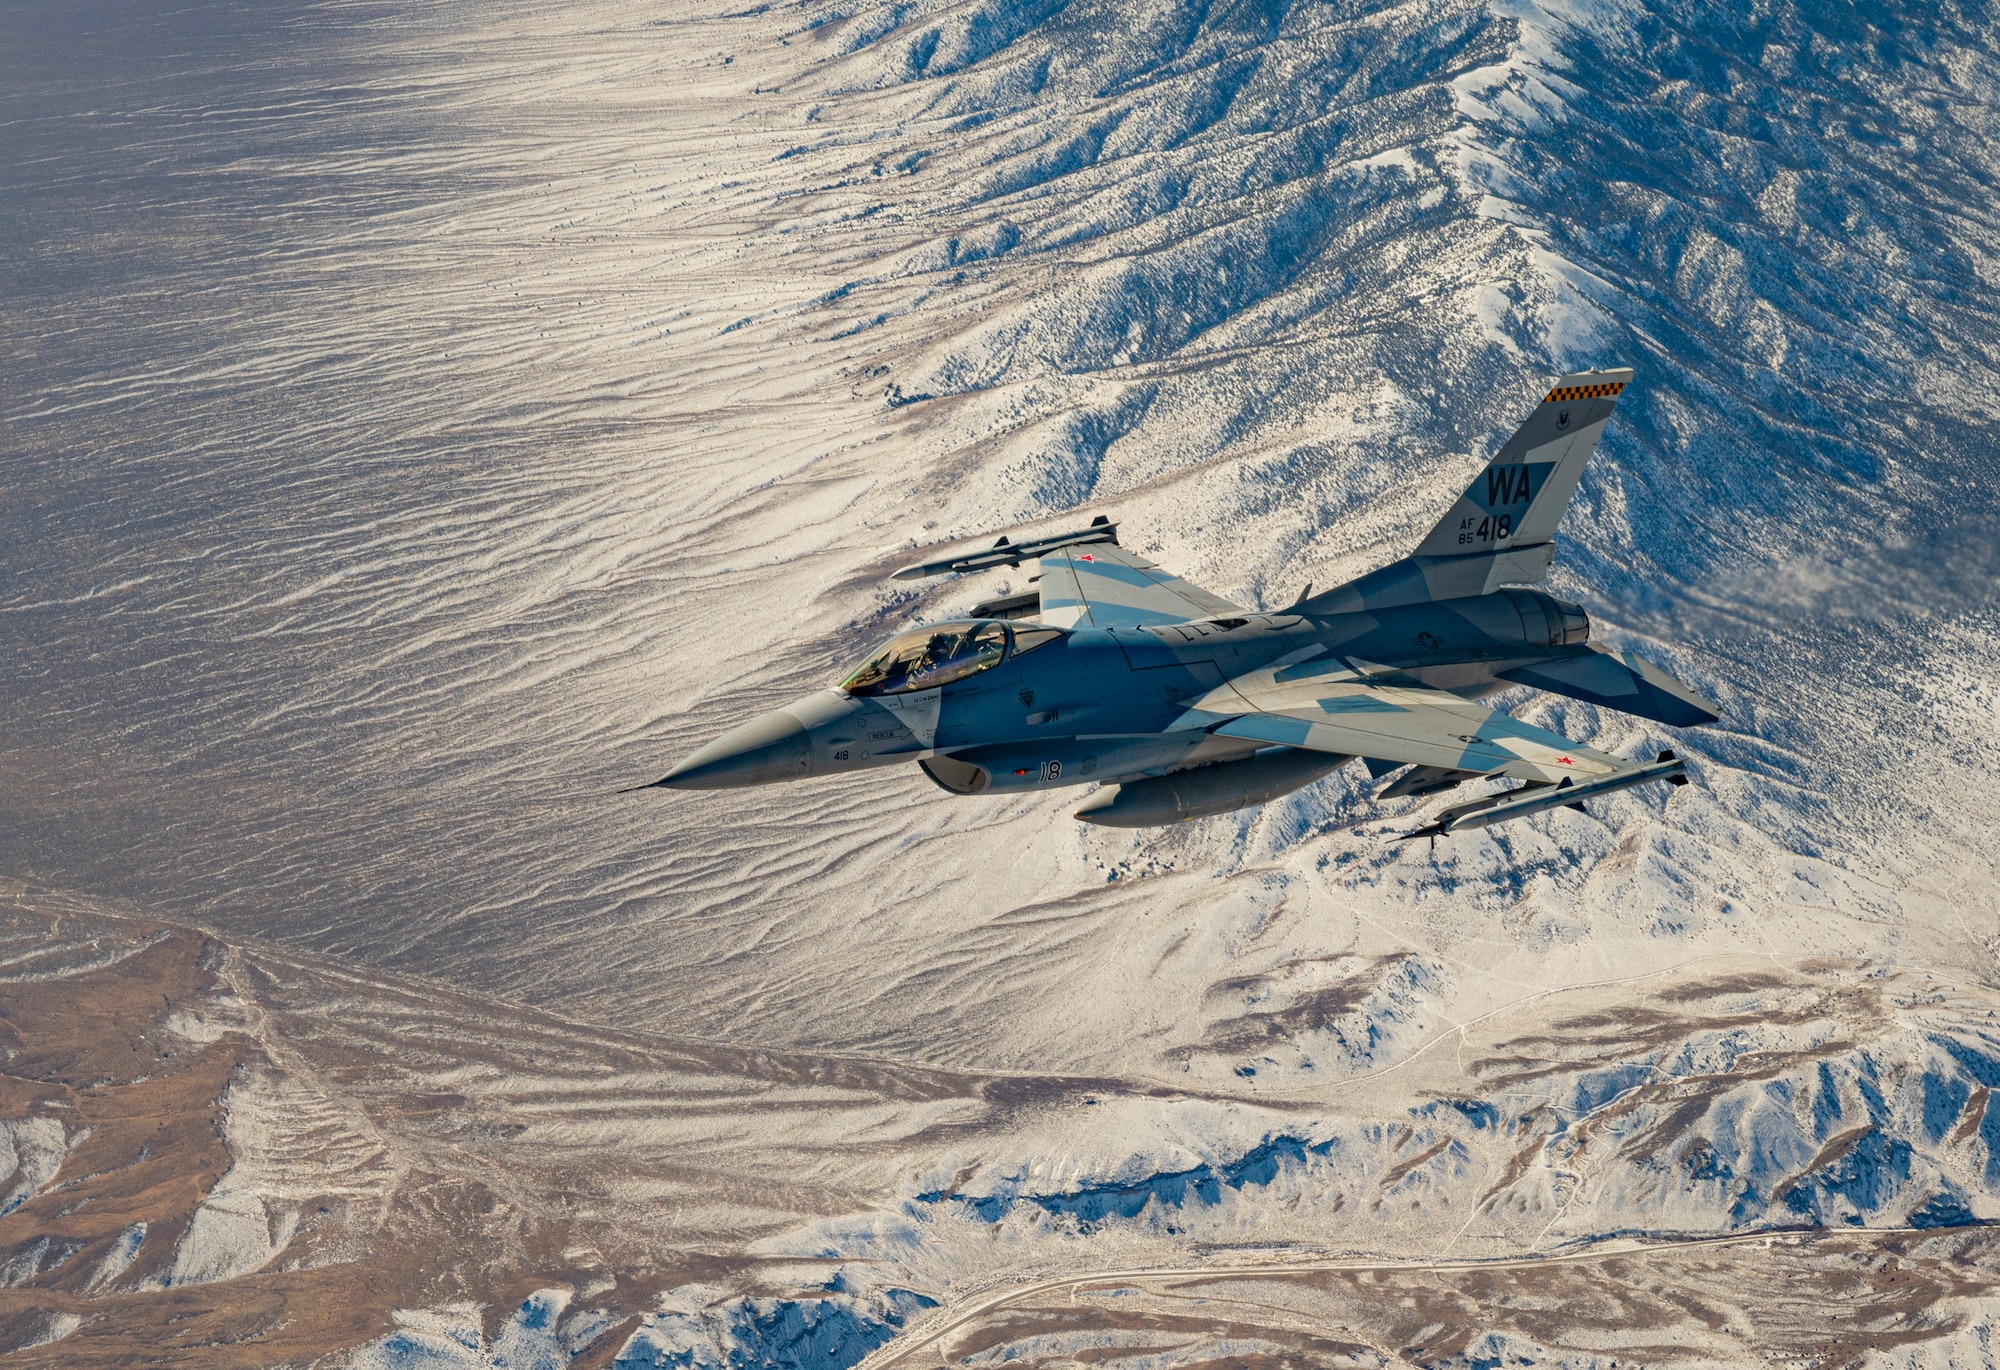 An F-16 Fighting Falcon assigned to the 64th Aggressor Squadron flies over the Nevada Test and Training Range